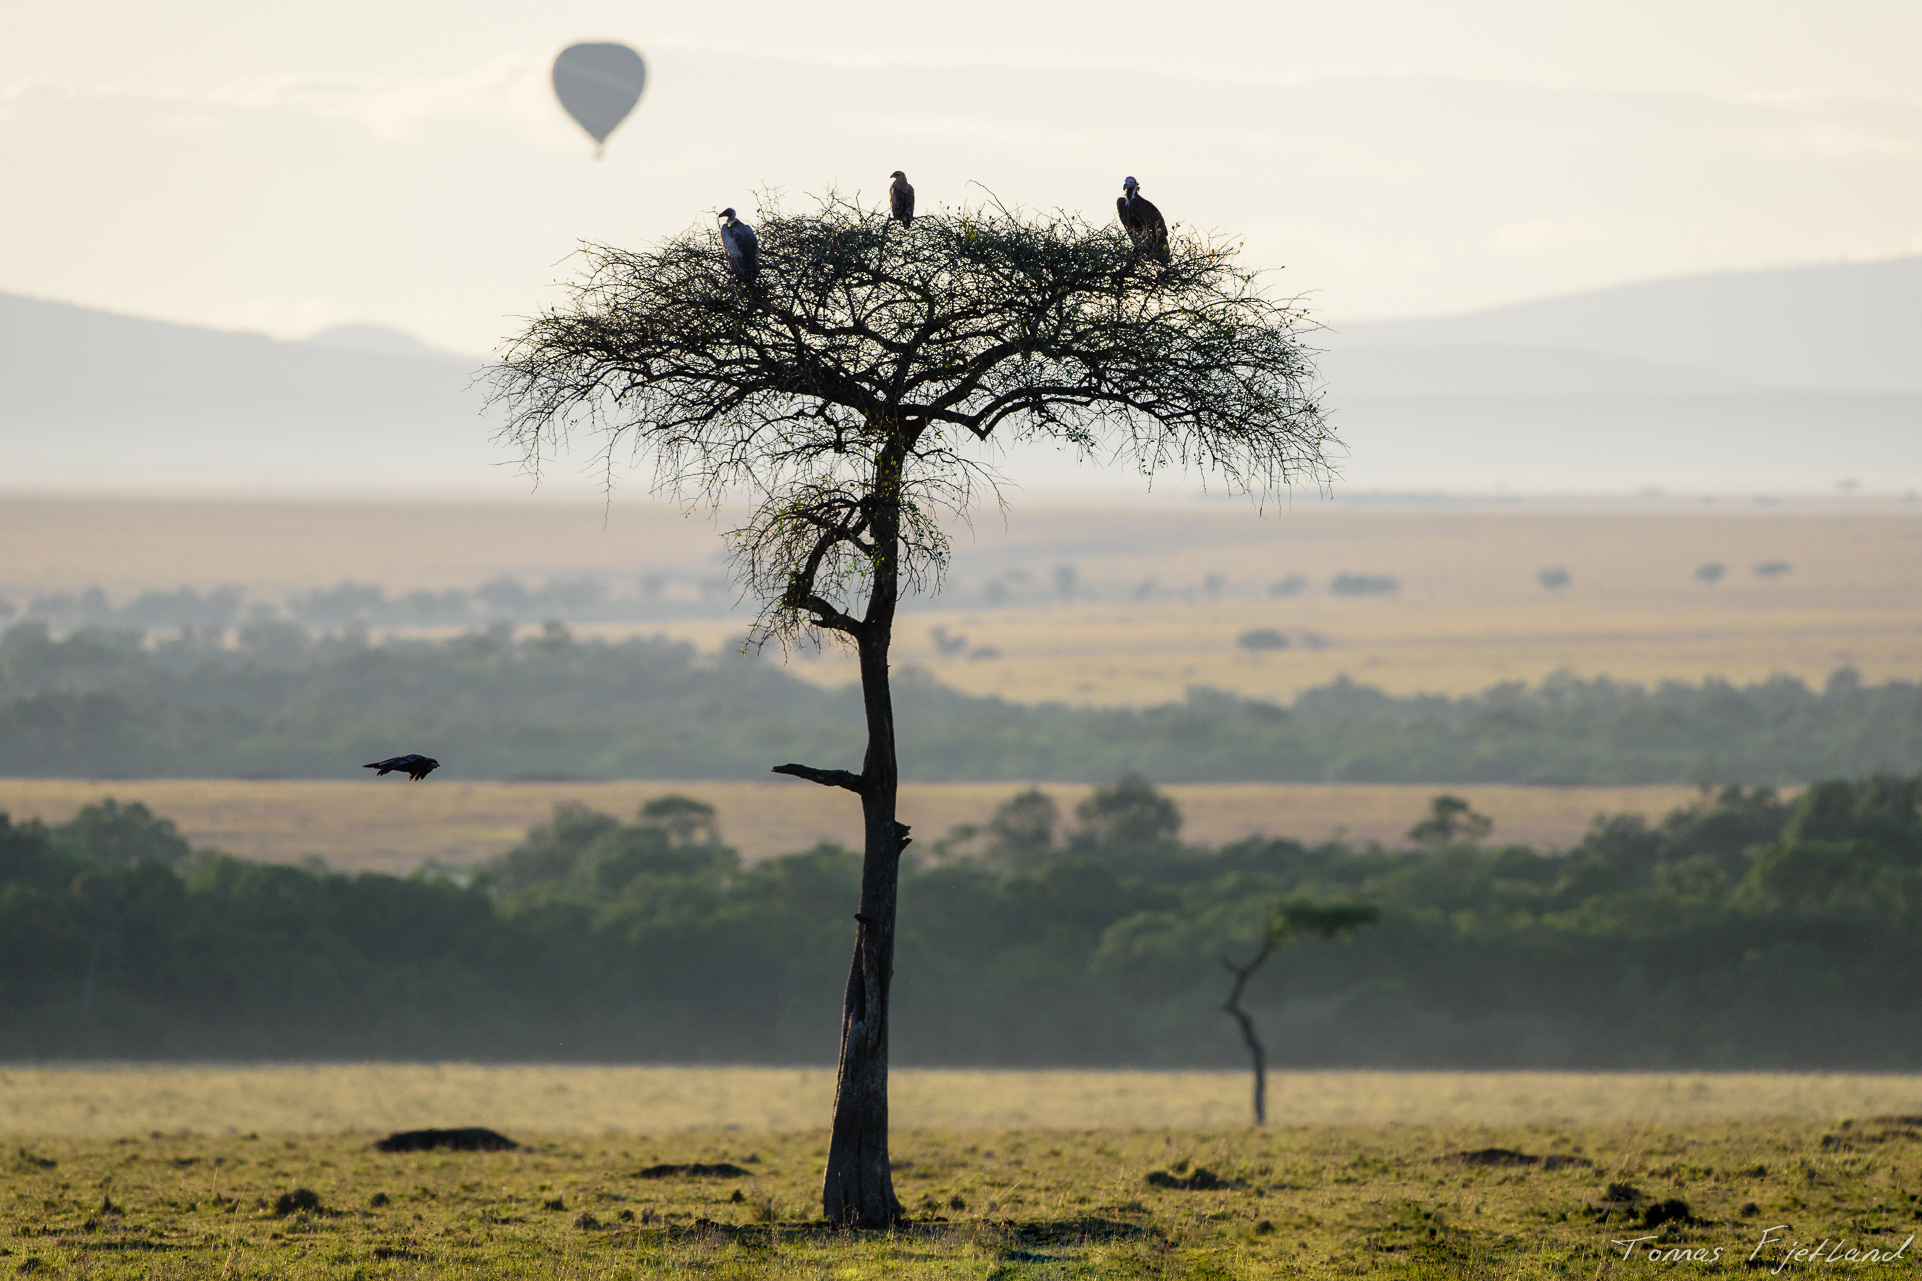 As the magical light fades, a balloon drifts across the mara behind a tree with vultures and an eagle